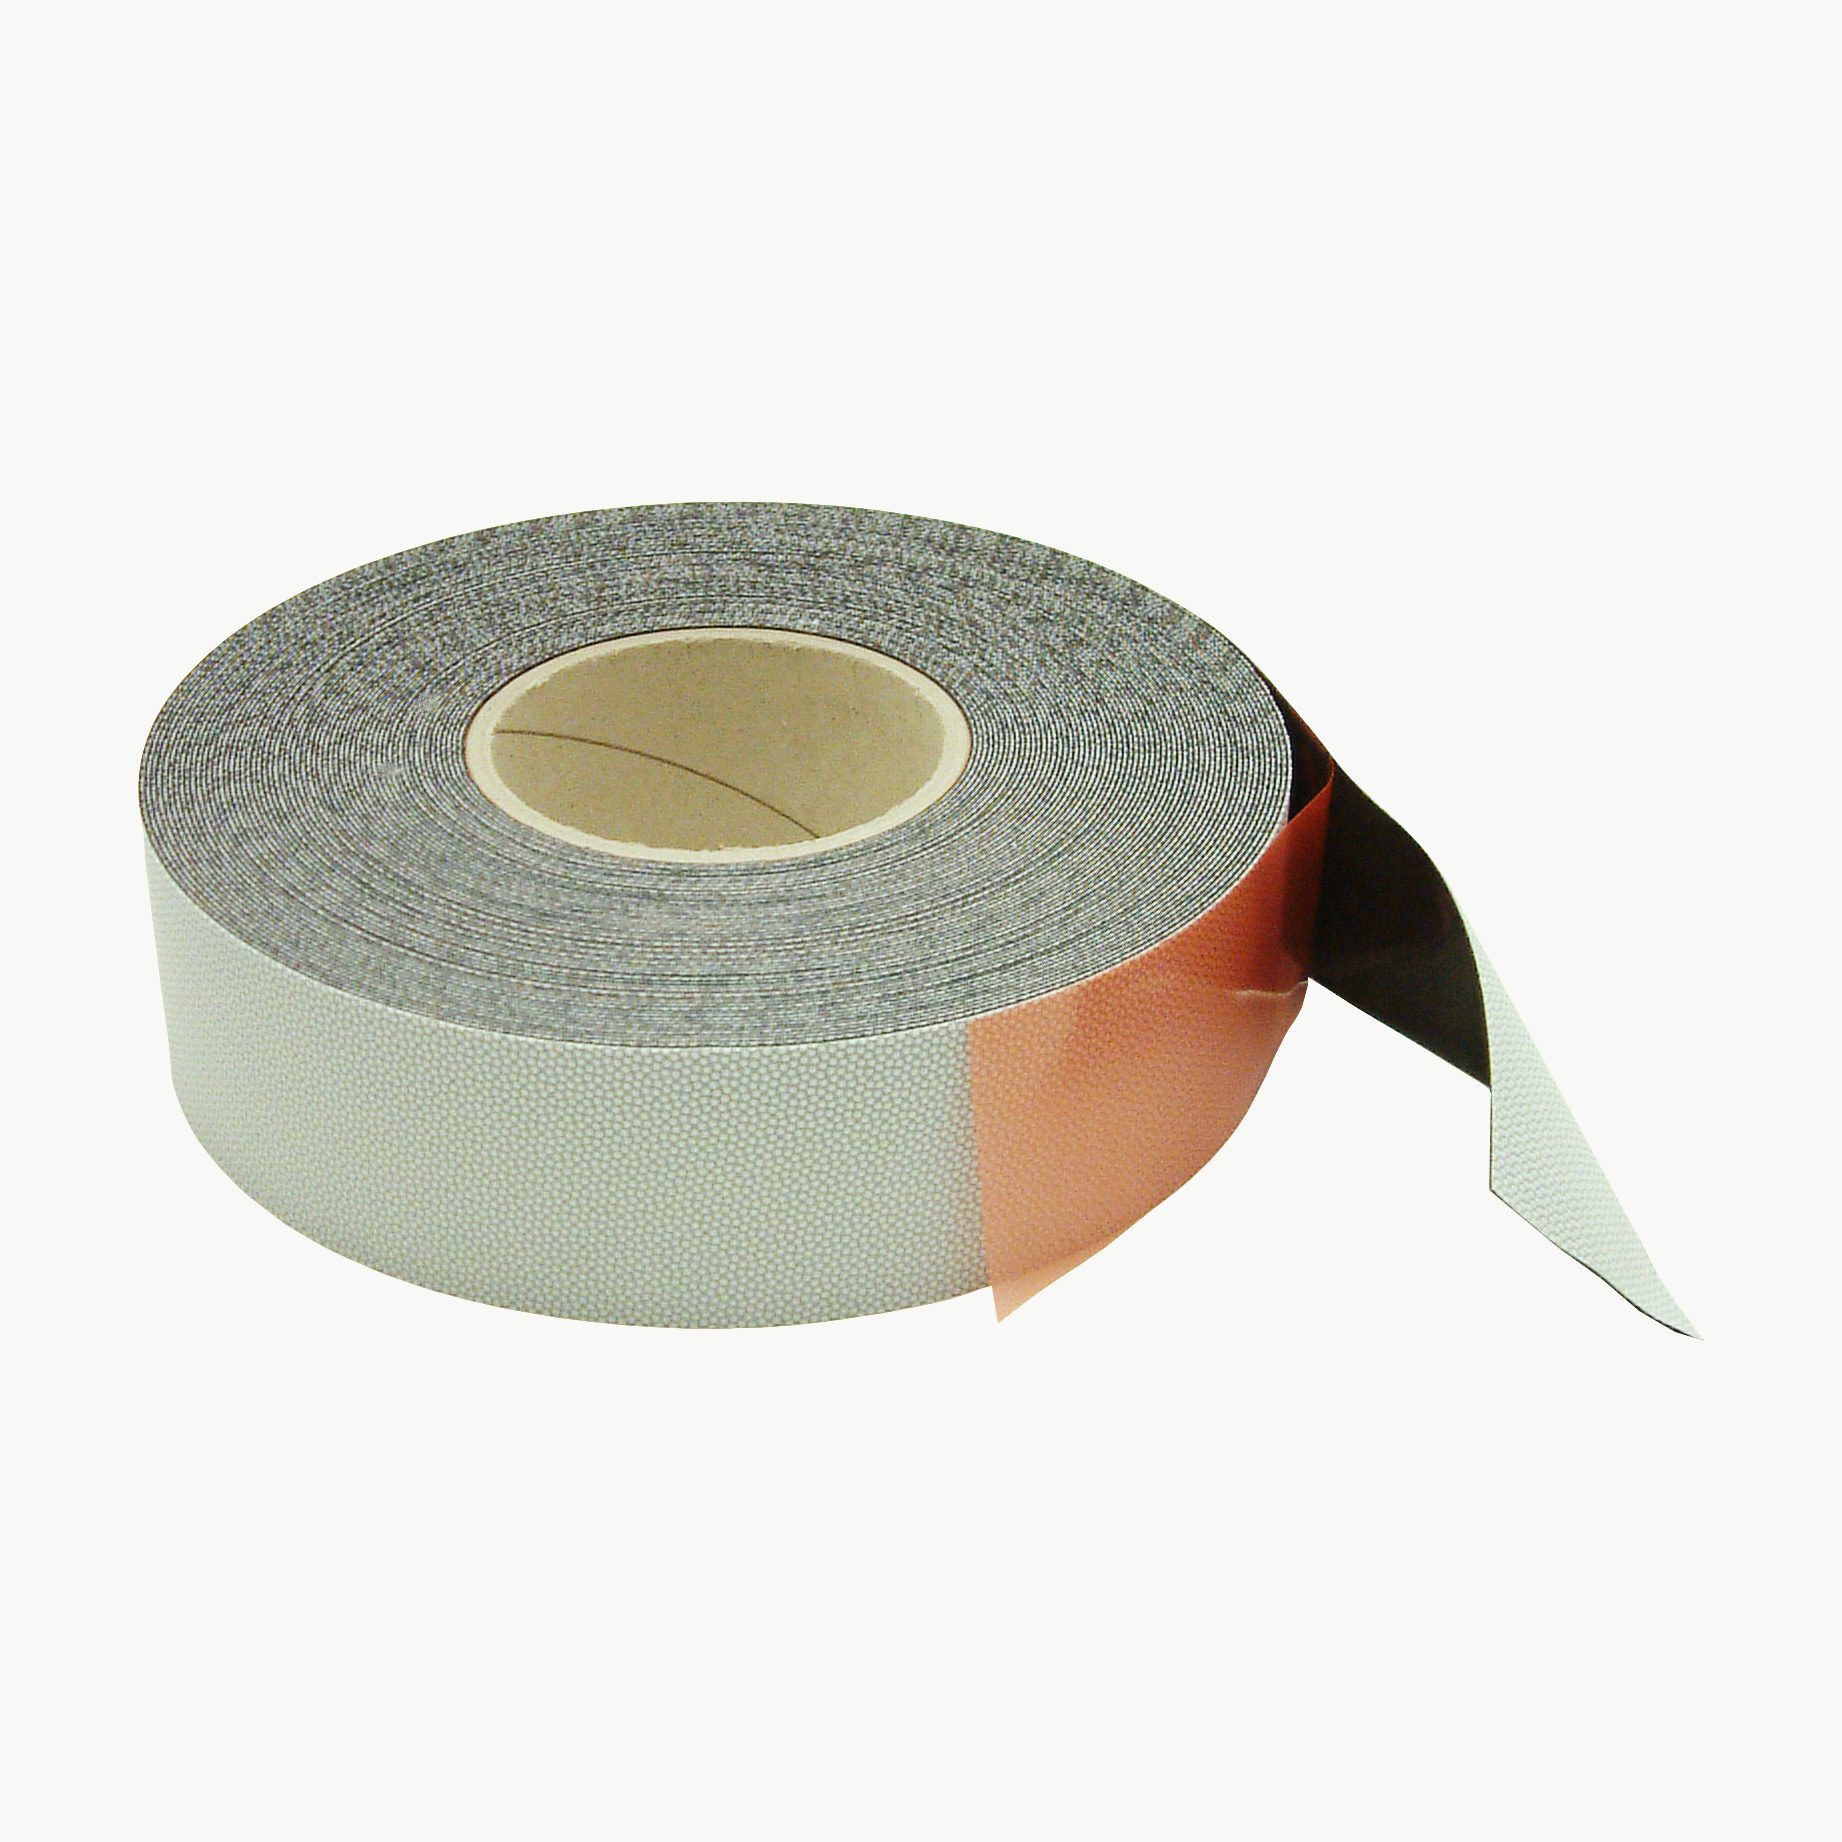 JVCC RW-32 Roller Wrap Tape [Dimpled Siliconized Cloth]